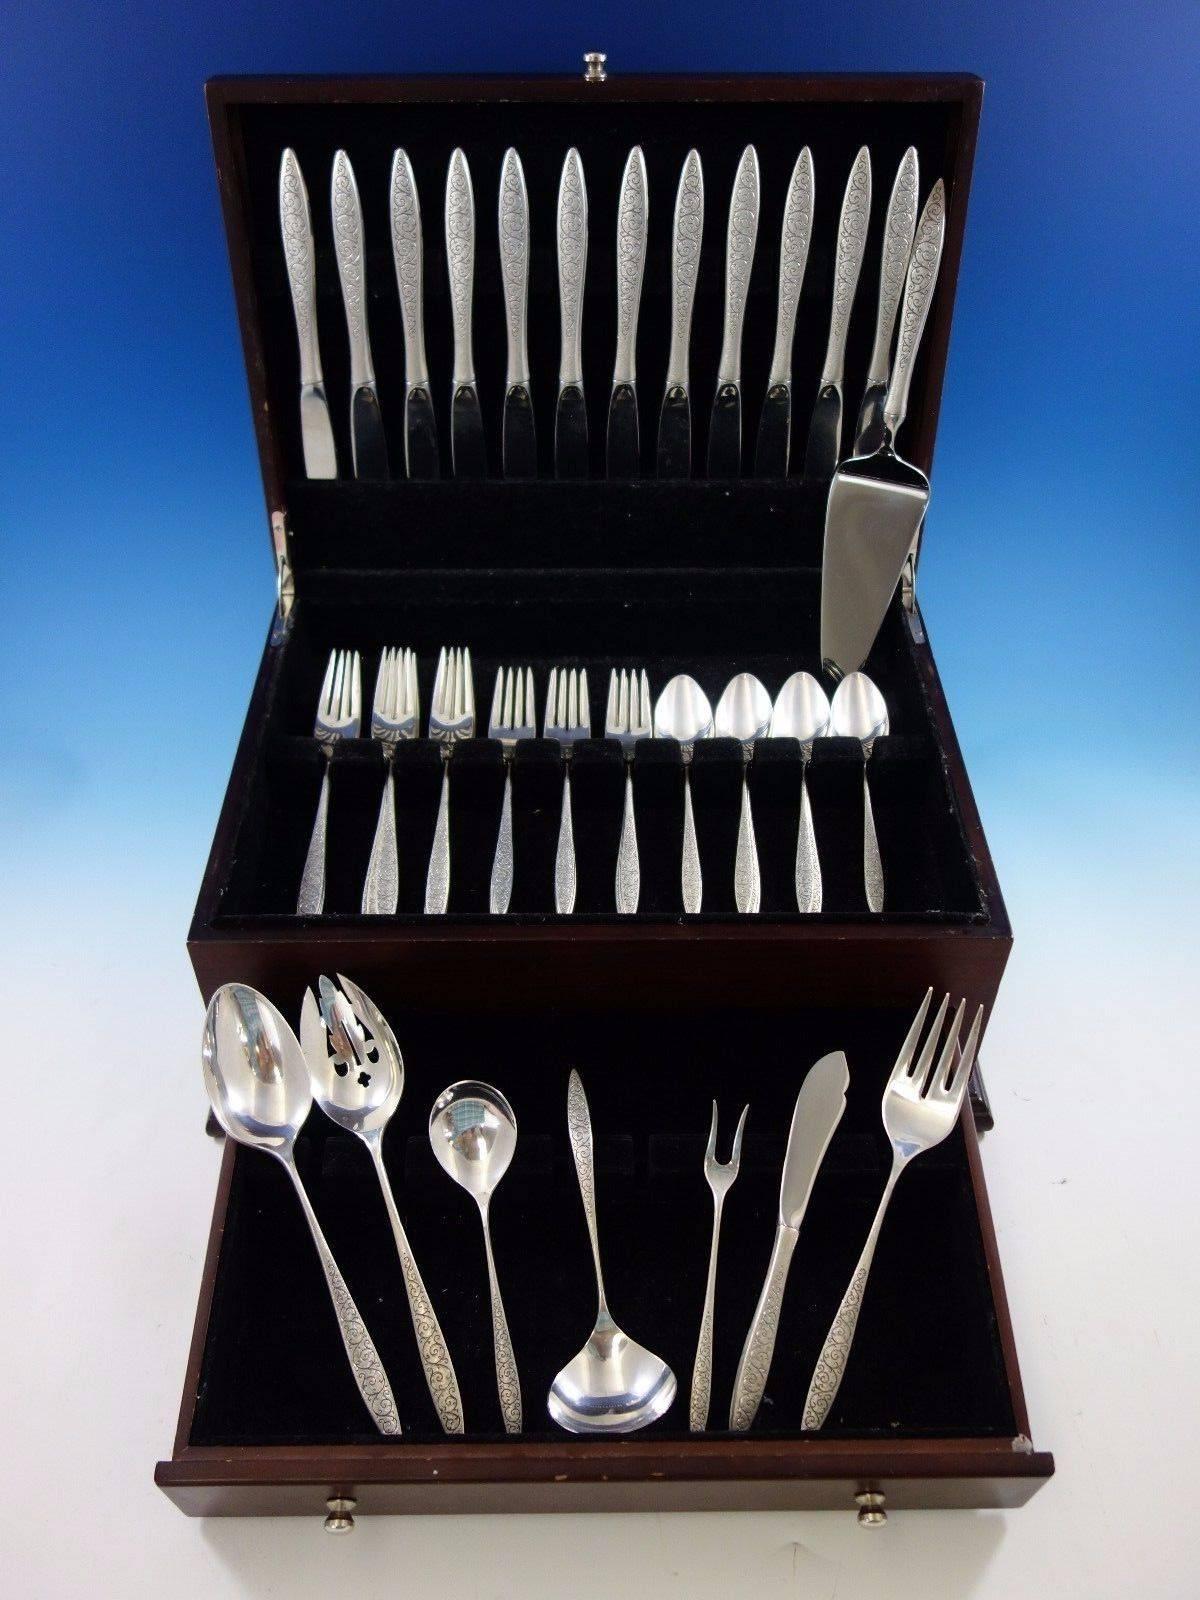 Spanish Lace by Wallace Sterling silver flatware set - 56 pieces. This set includes: 

12 knives, 9 1/8